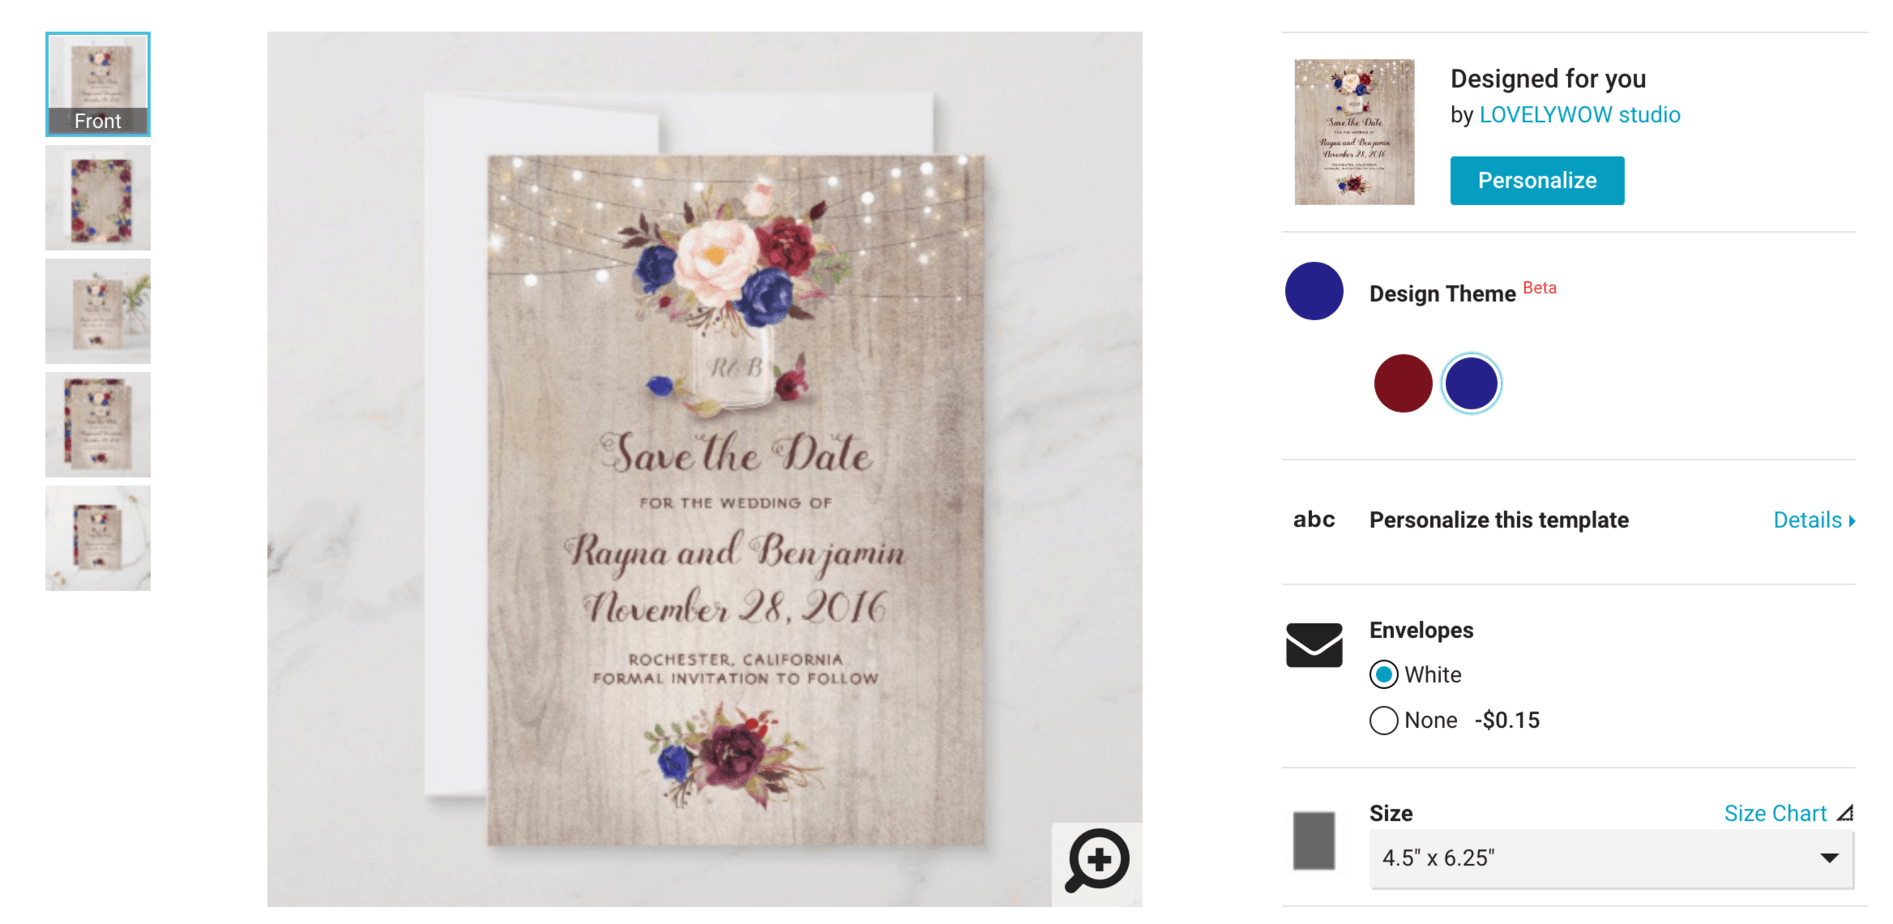 This design theme option shows the burgundy colored graphic version of this save the date This design theme option shows the navy colored graphic version of this save the date